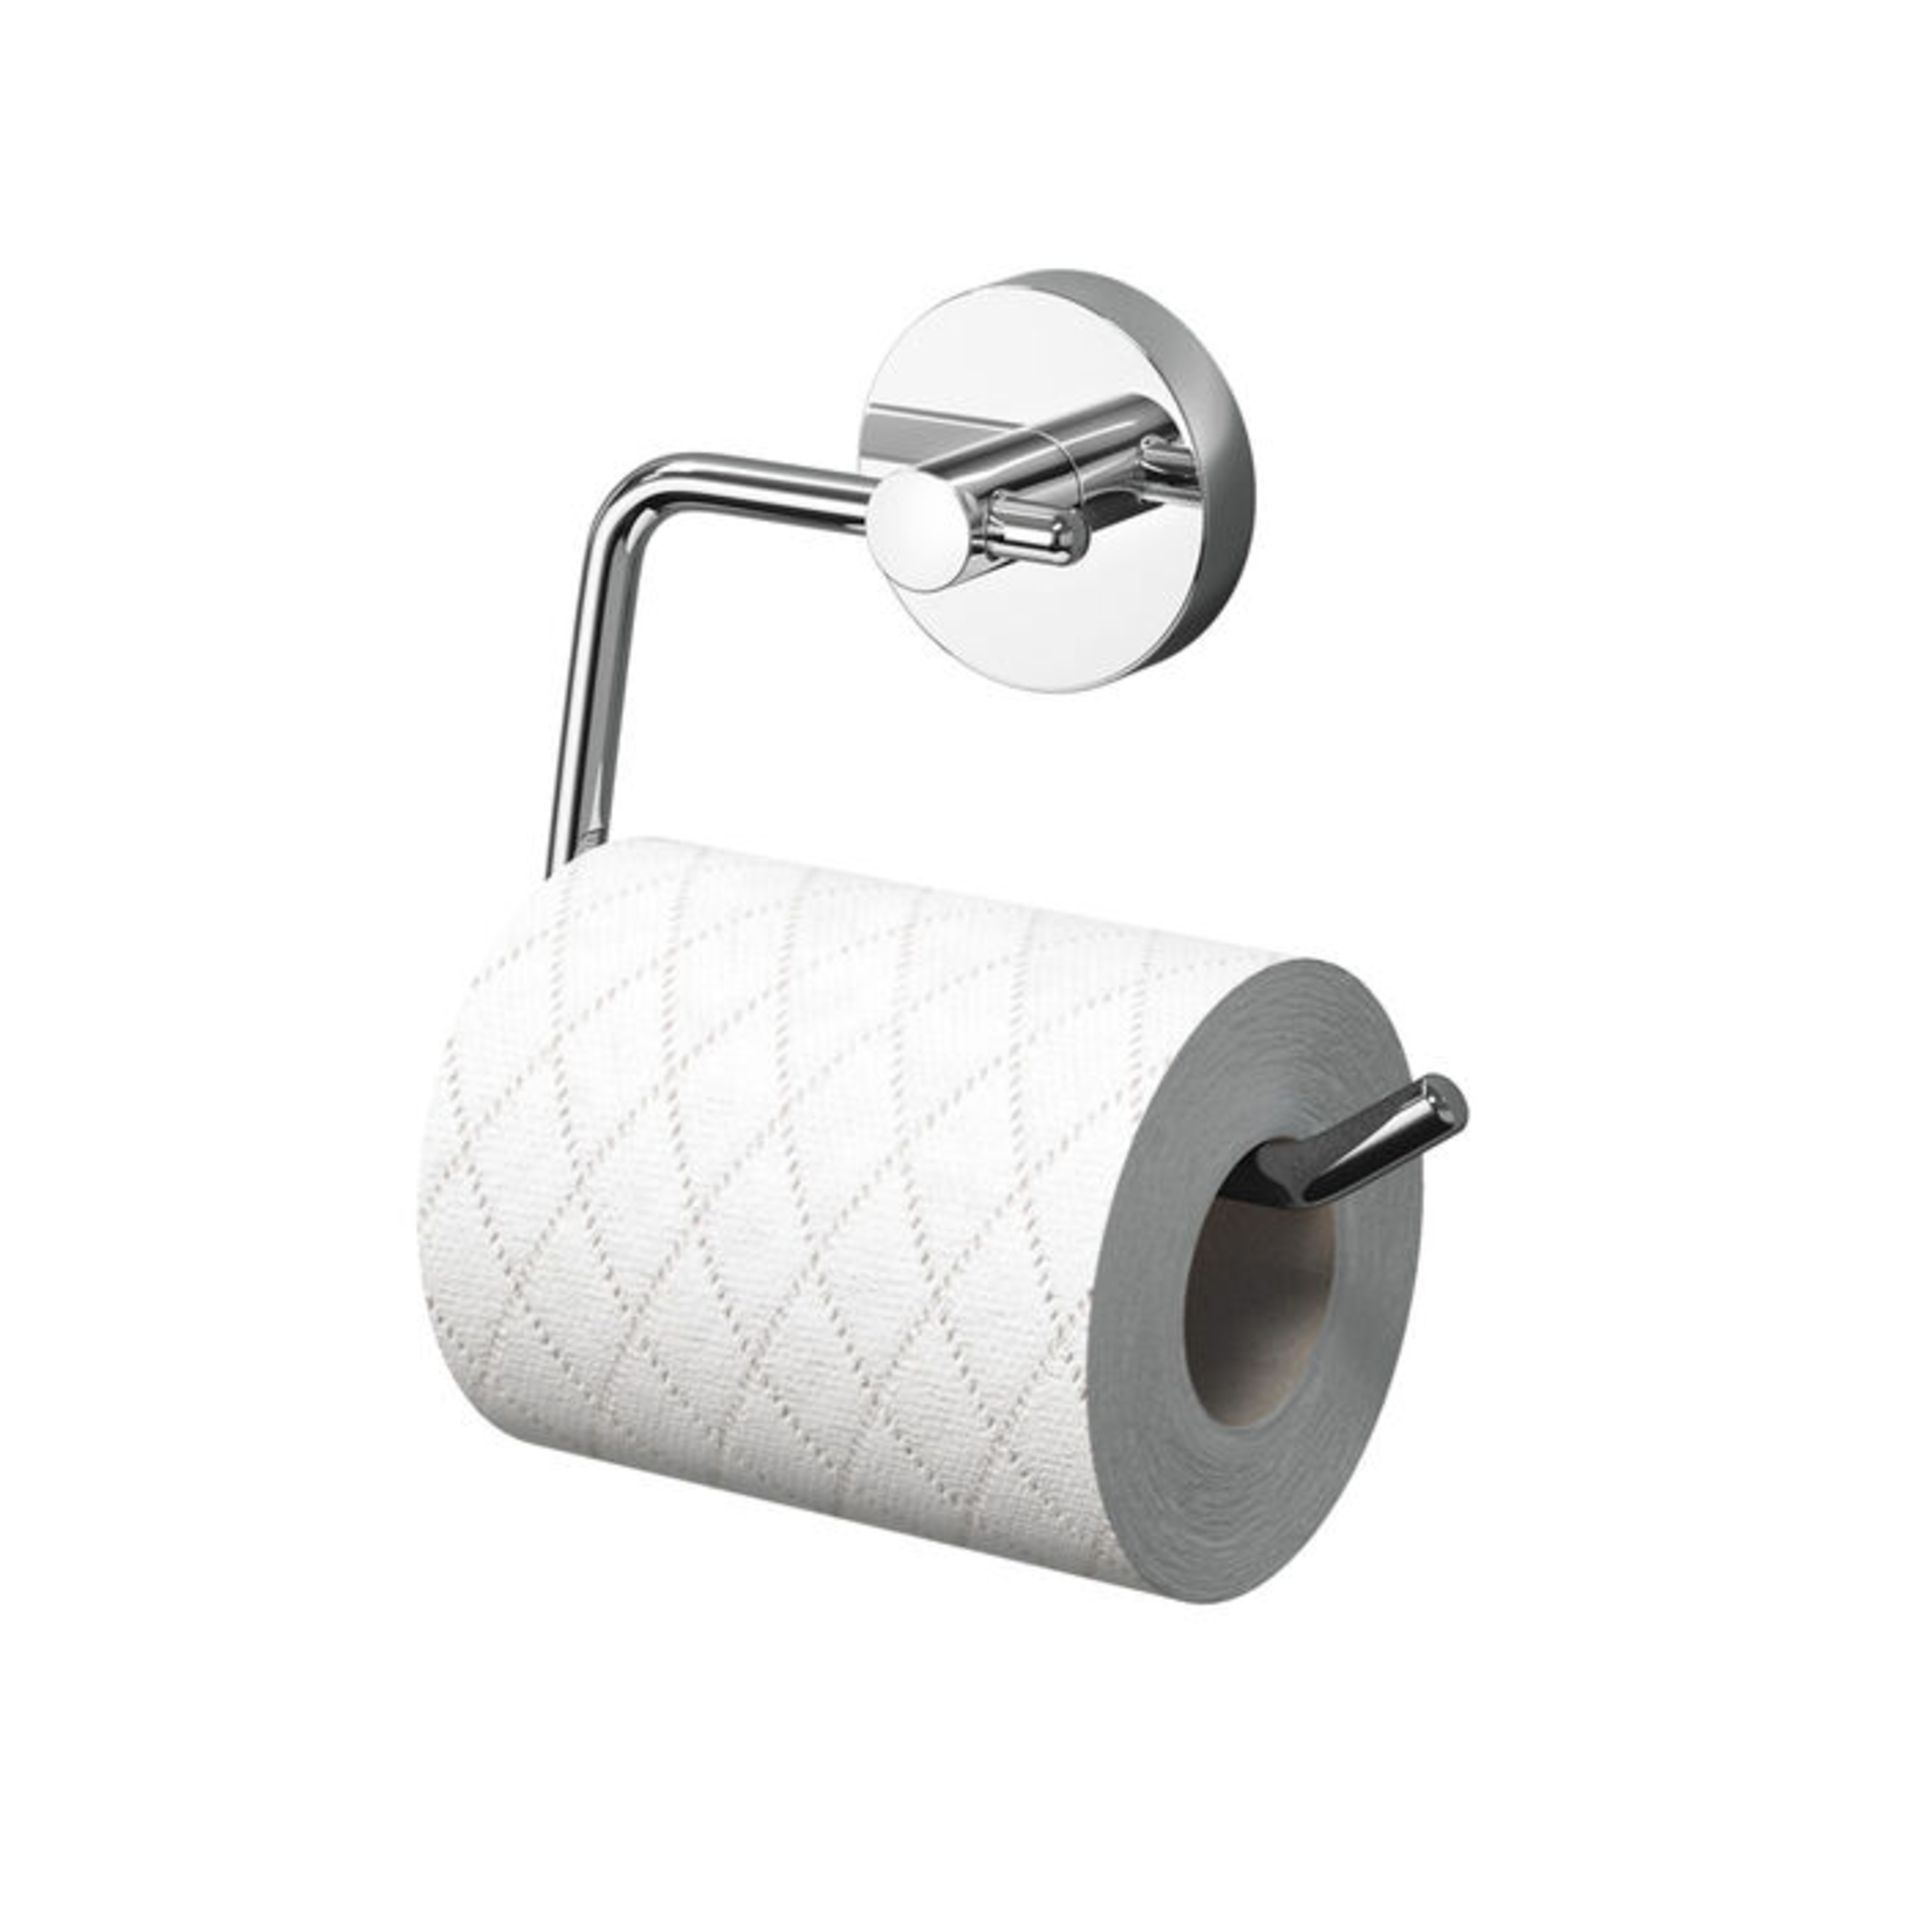 (EE1010) Finsbury Toilet Roll Holder. Completes your bathroom with a little extra style Made ... - Image 4 of 4